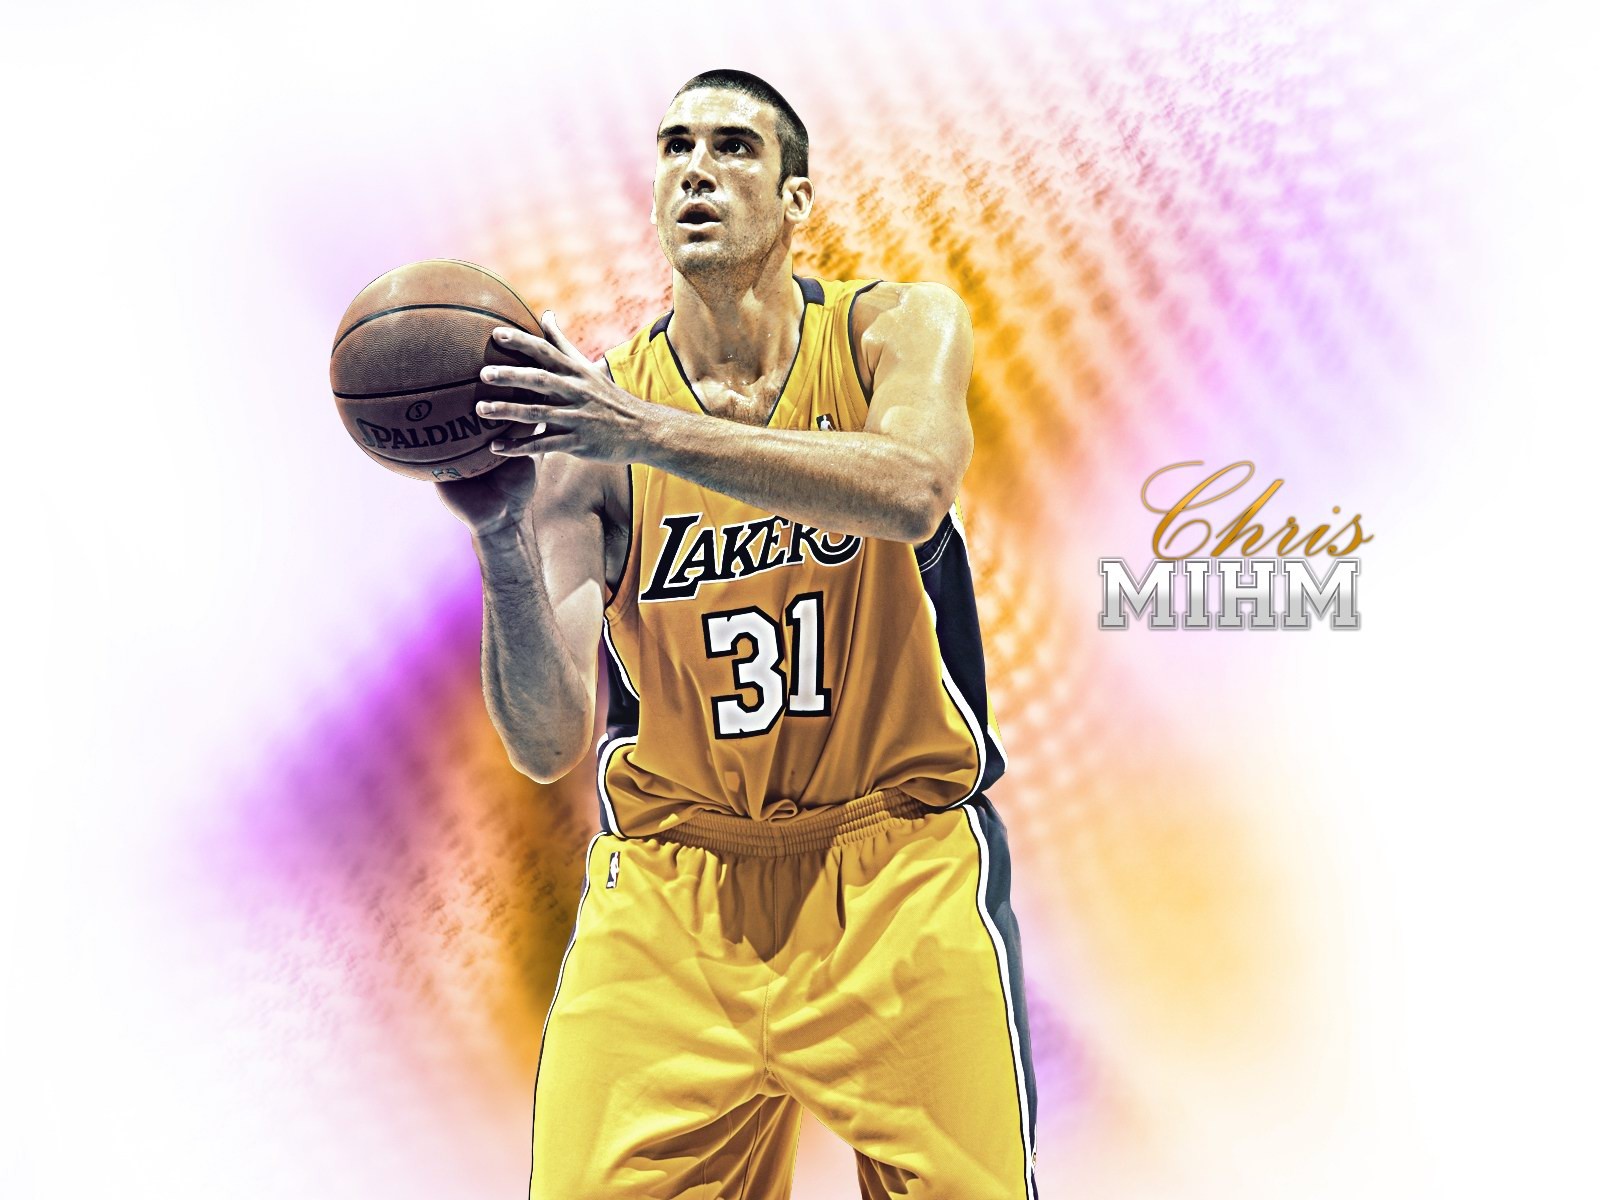 Los Angeles Lakers Official Wallpaper #5 - 1600x1200